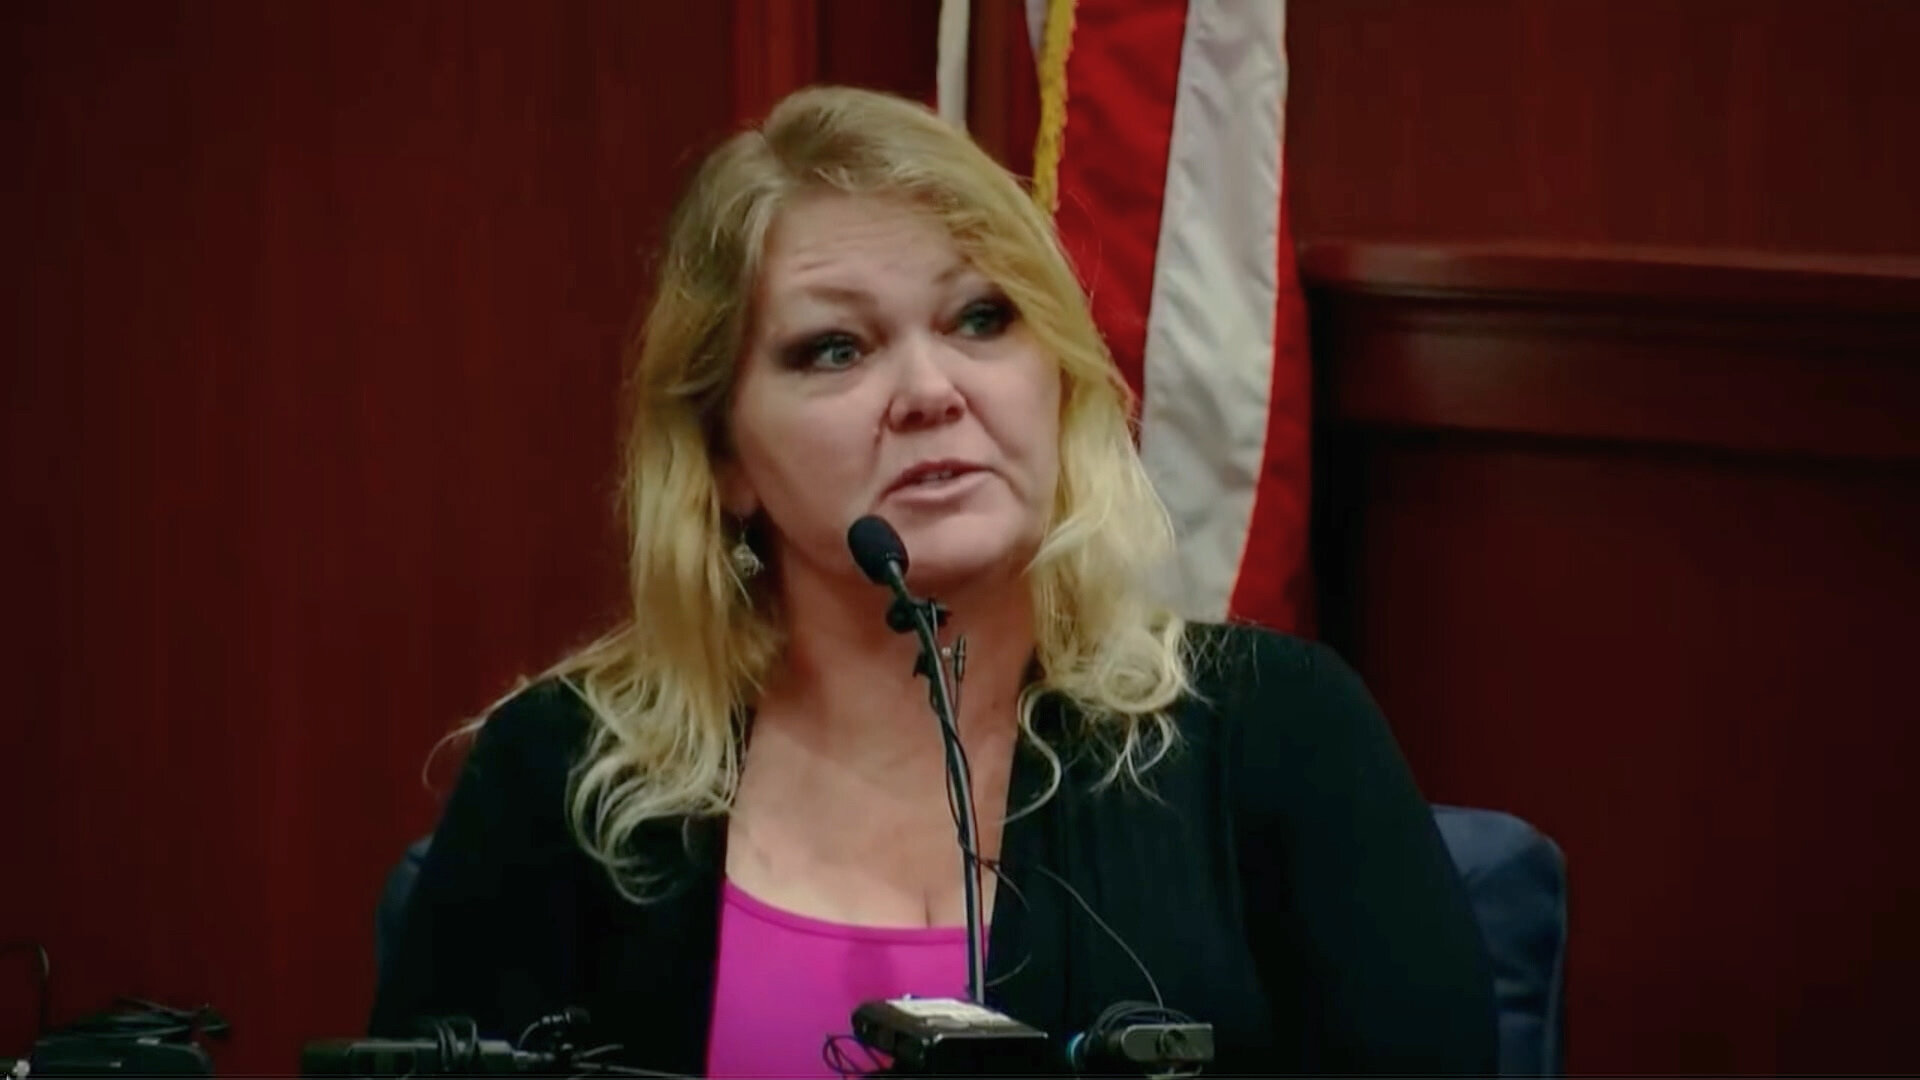 Court Cam Presents Under Oath S1E11 Tammy Moorer